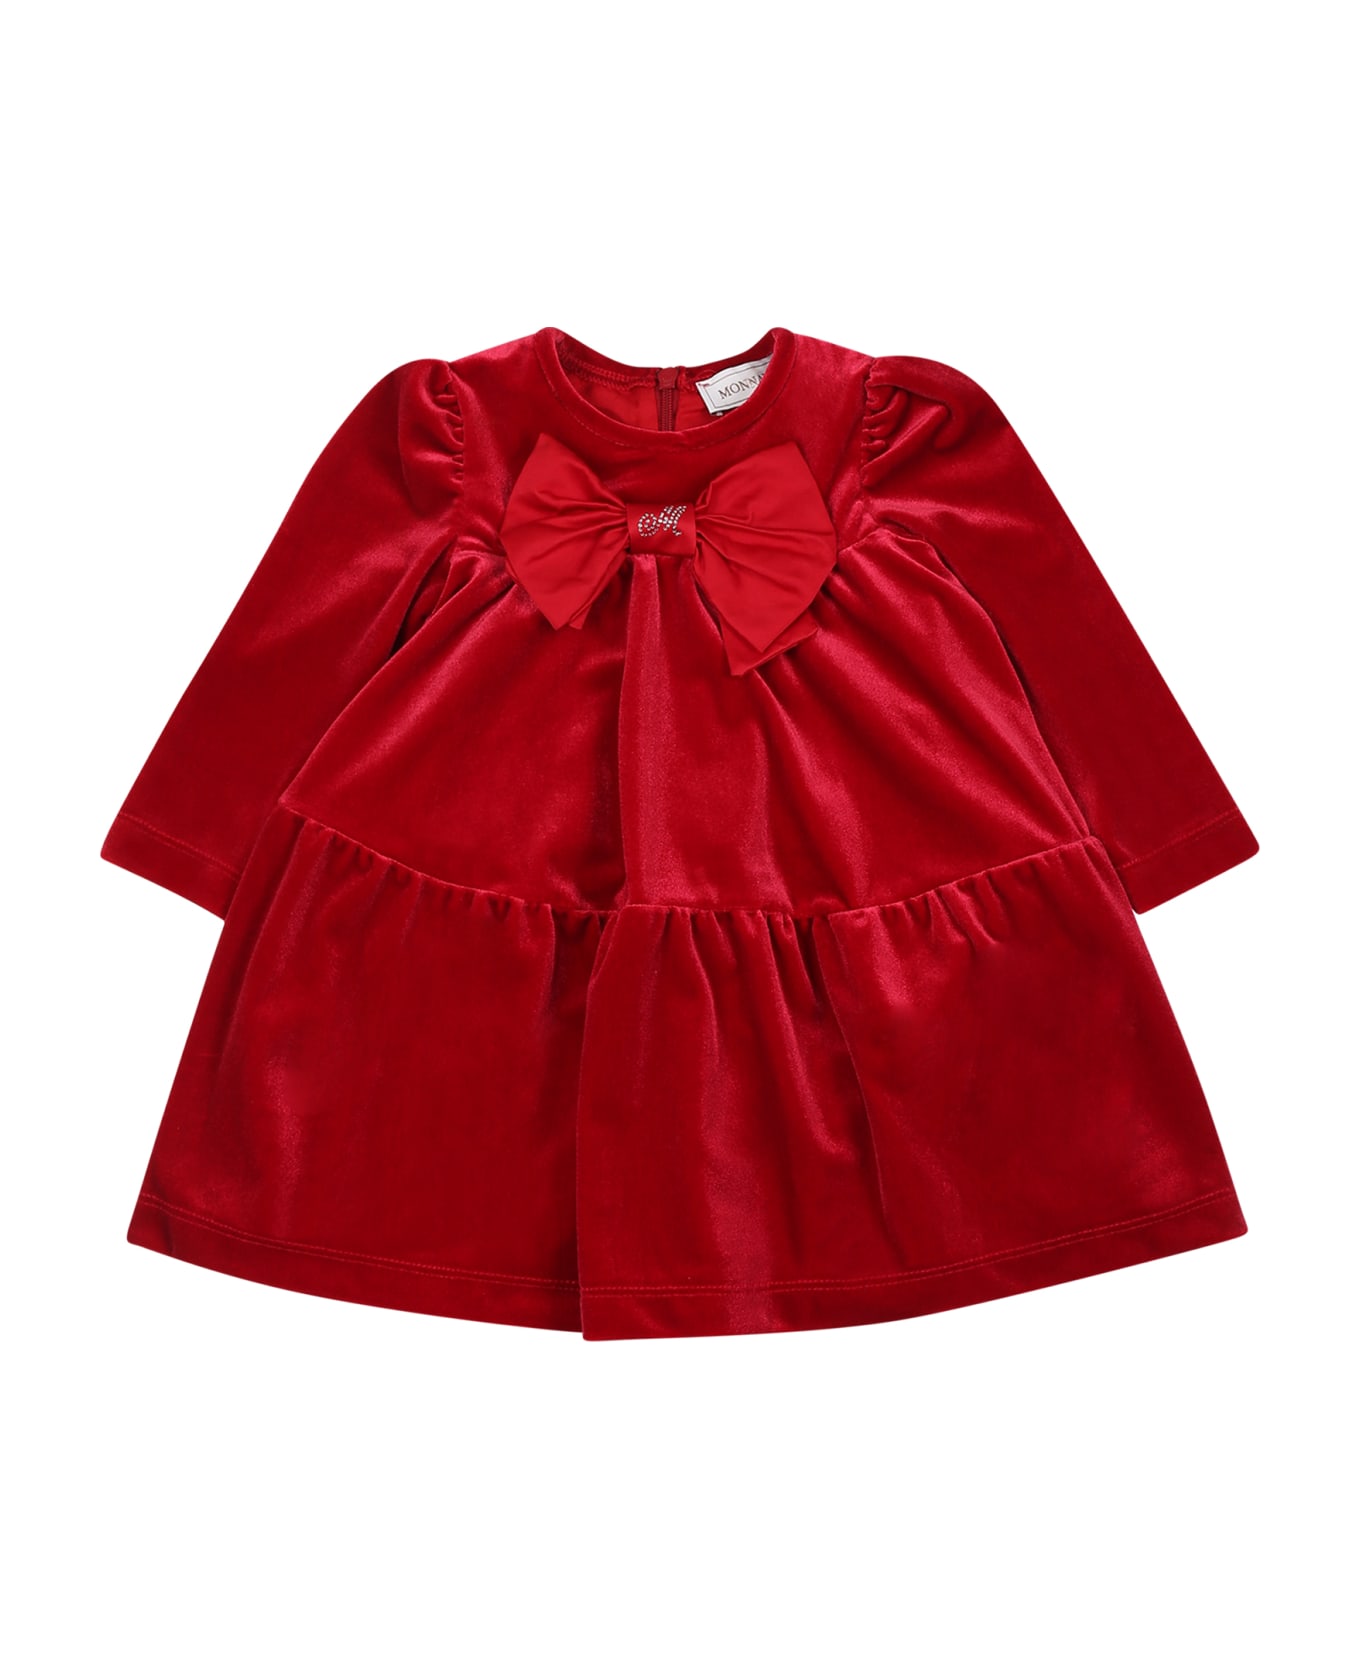 Monnalisa Red Dress For Girl With Bow - Red